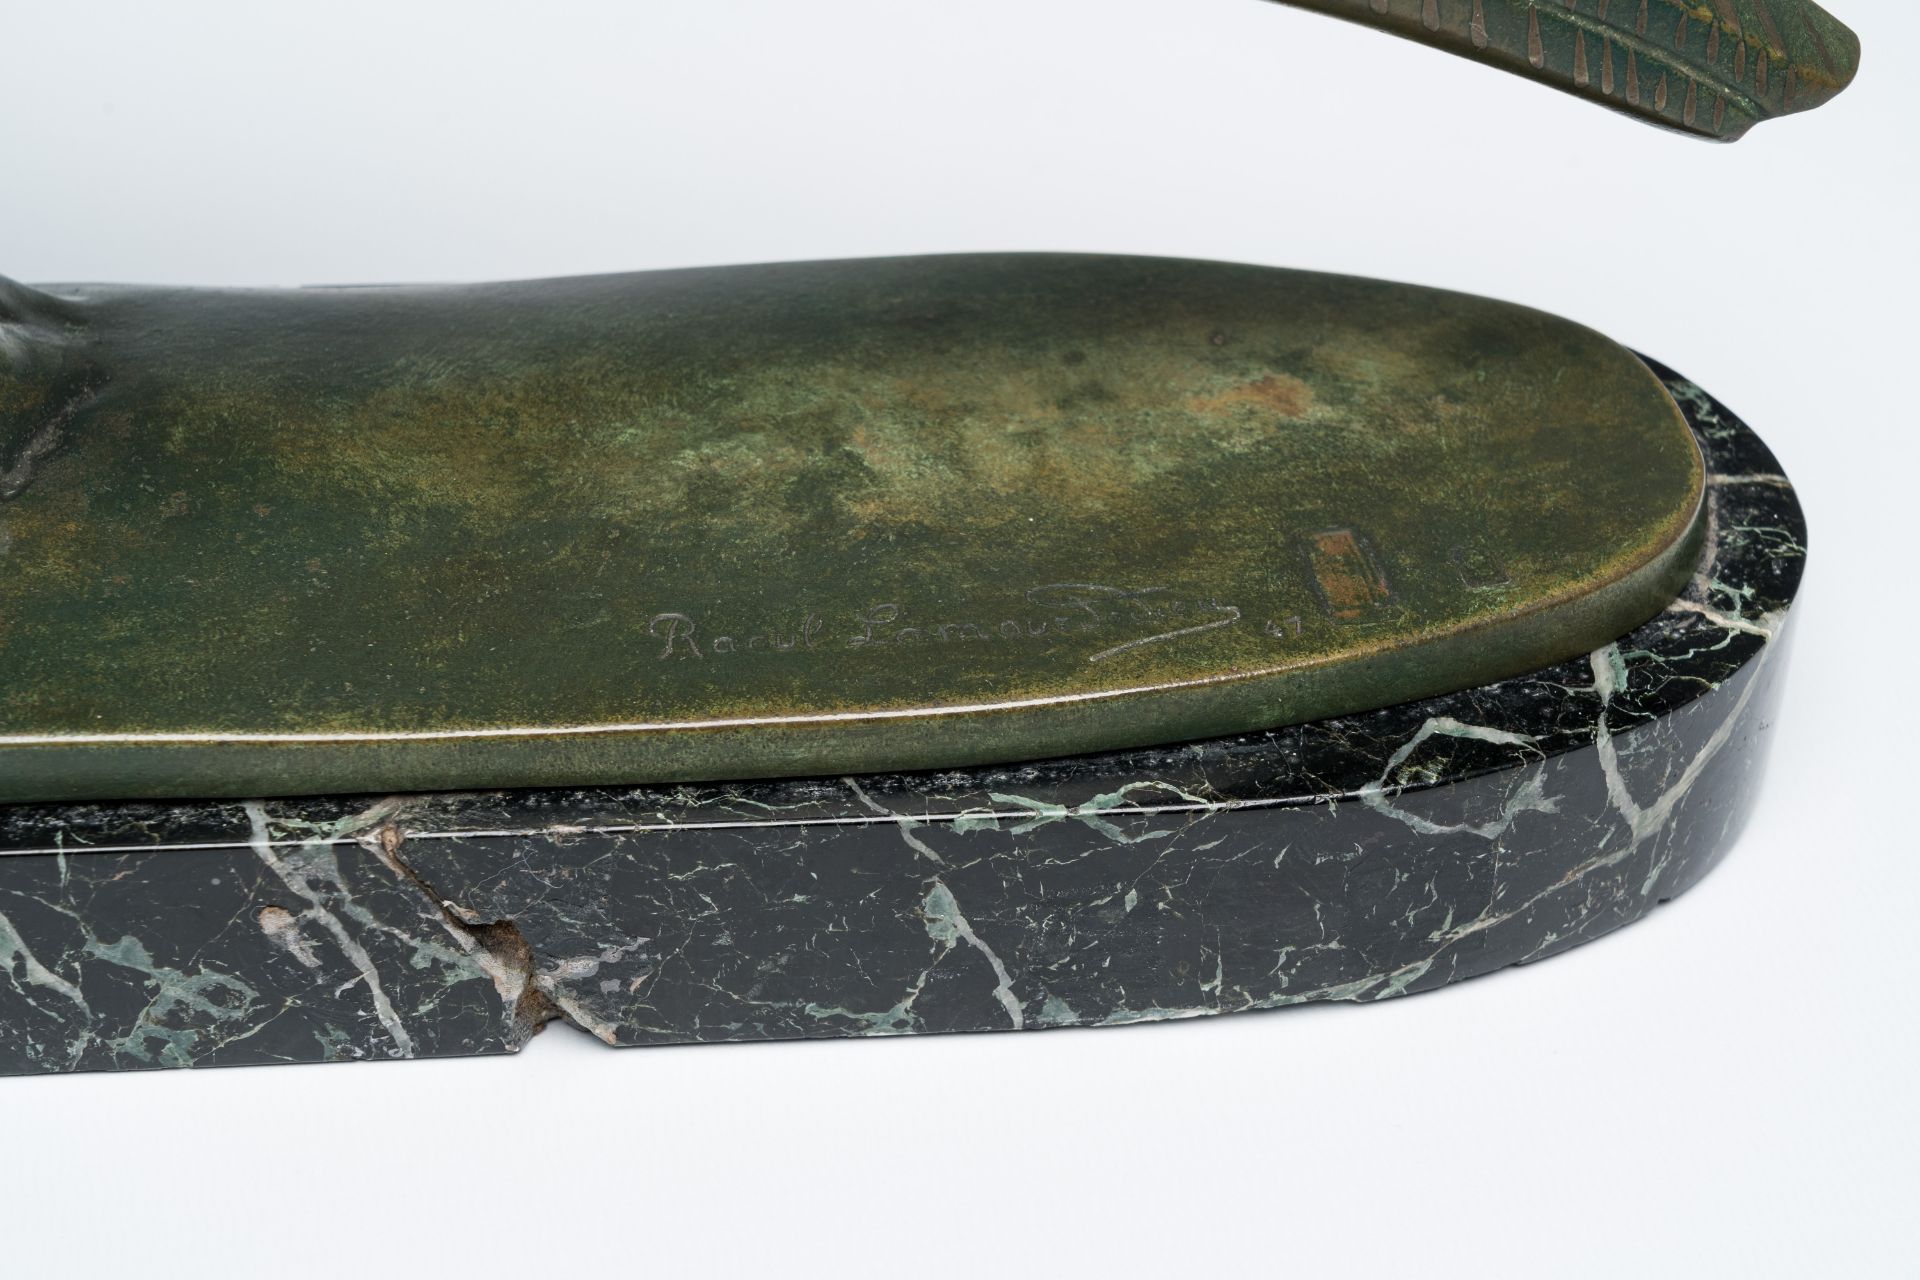 Raoul Eugene Lamourdedieu (1877-1953): Pheasant, green patinated bronze on a marble base, dated (19) - Image 6 of 8